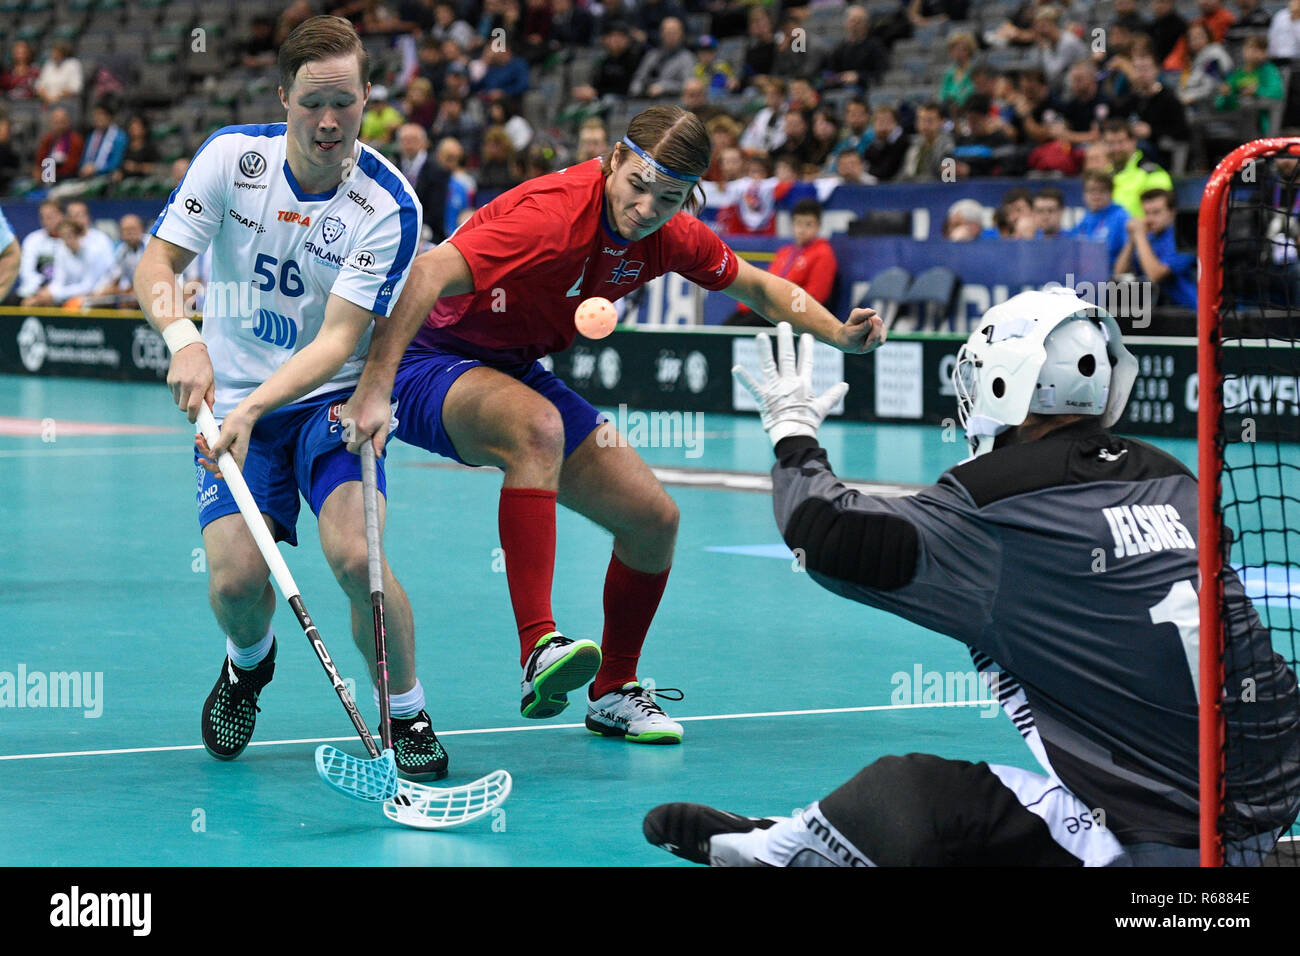 Prague, Czech Republic. 04th Dec, 2018. From left KRISTER SAVONEN of Finland, MARTIN ISNES KVISVIK of Norway and goalie of Norway MARKUS JELSNES in action during the Men's World Floorball Championship, group B match Finland vs Norway, played in Prague, Czech Republic, on December 4, 2018. Credit: Michal Kamaryt/CTK Photo/Alamy Live News Stock Photo